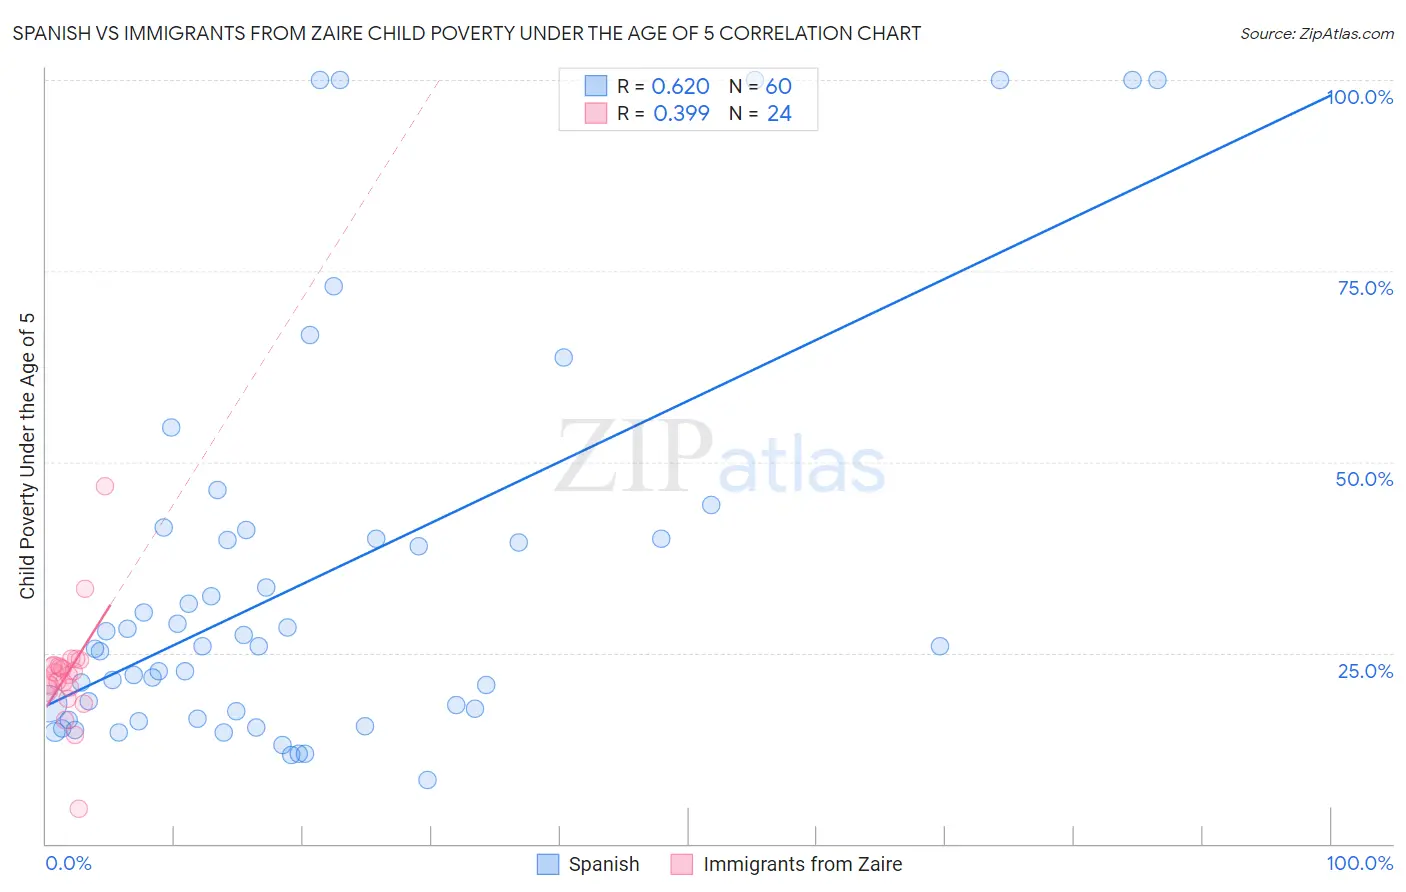 Spanish vs Immigrants from Zaire Child Poverty Under the Age of 5